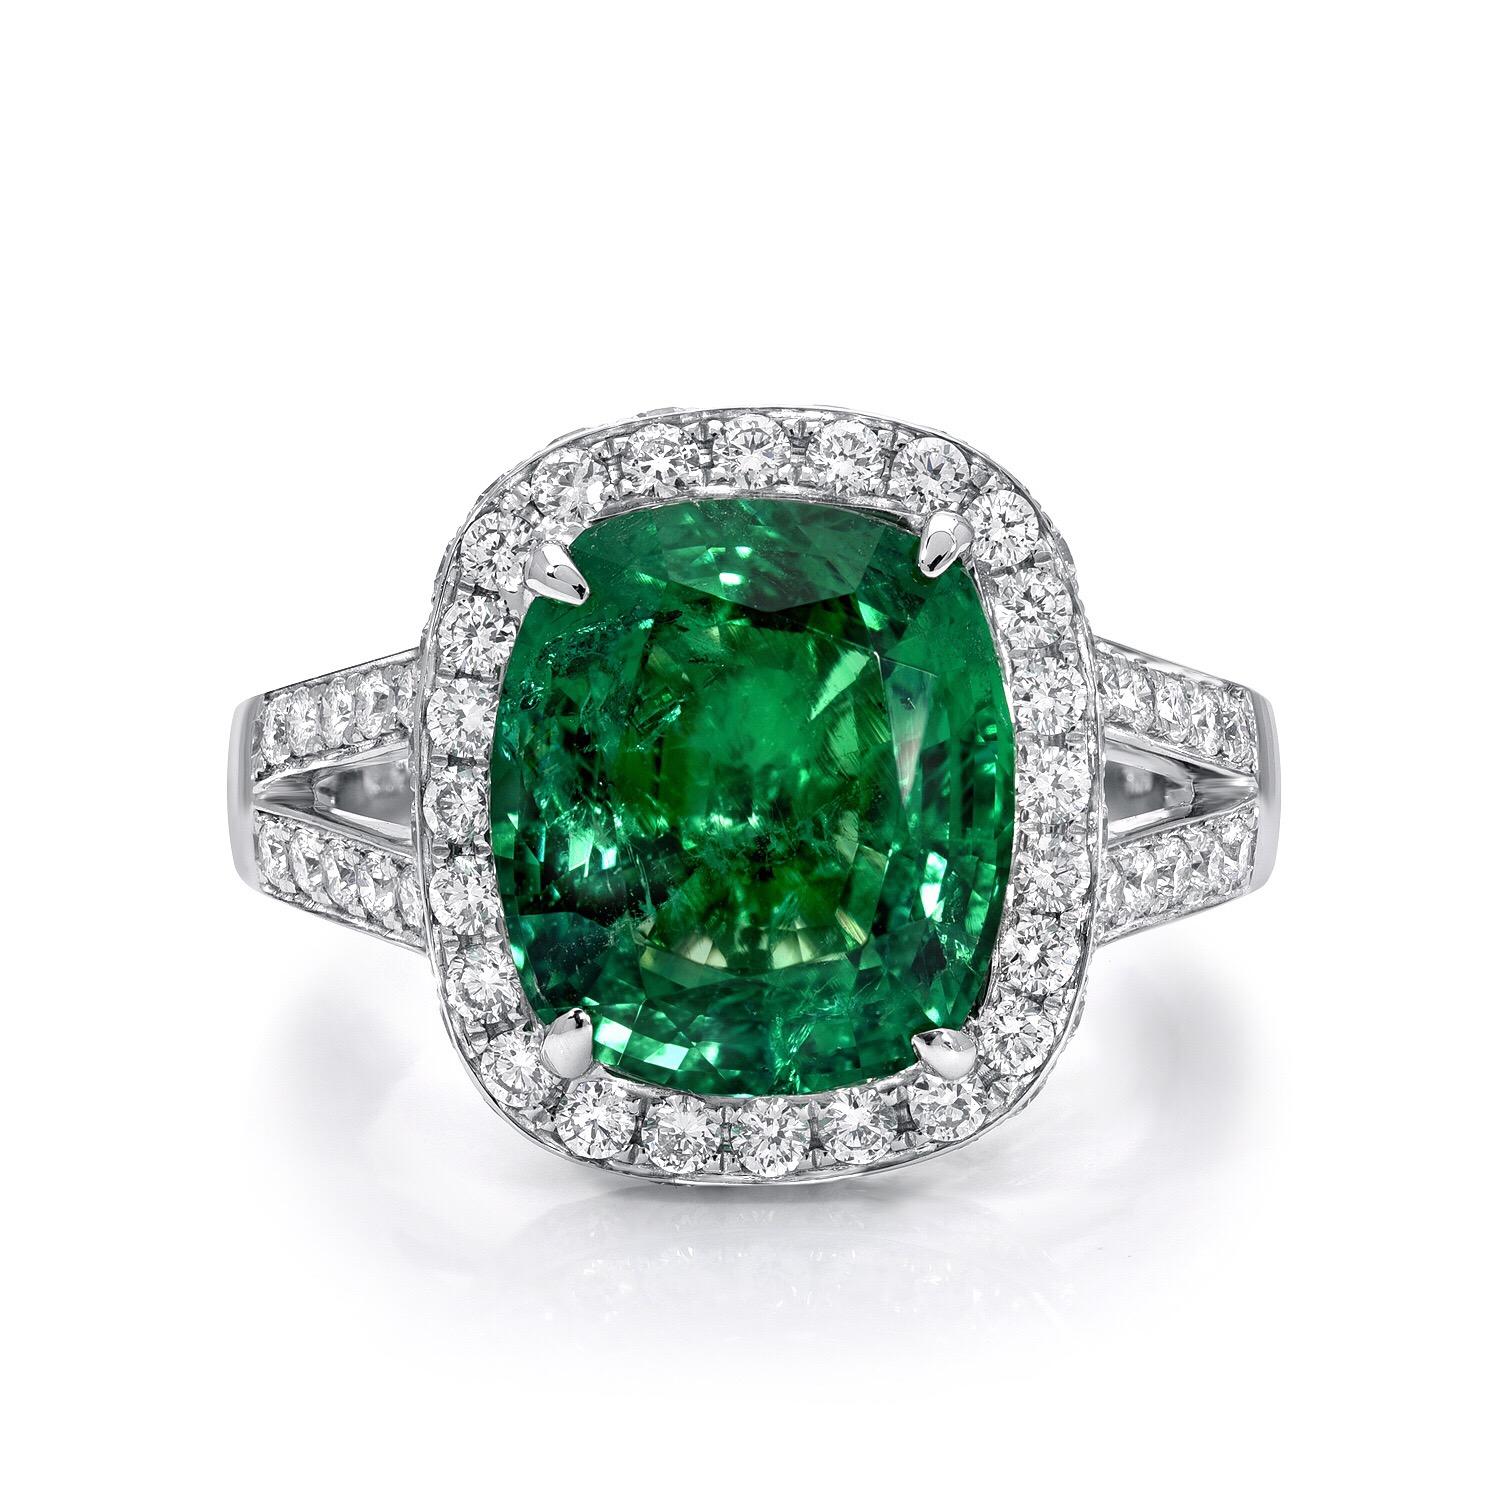 Emerald engagement ring featuring a 4.66 carat vibrant Emerald cushion cut, accented by a total of 1.06 carats of round brilliant diamonds, in 18K white gold.
Emerald ring size 6.5. Resizing is complimentary upon request.

The C. Dunaigre gem